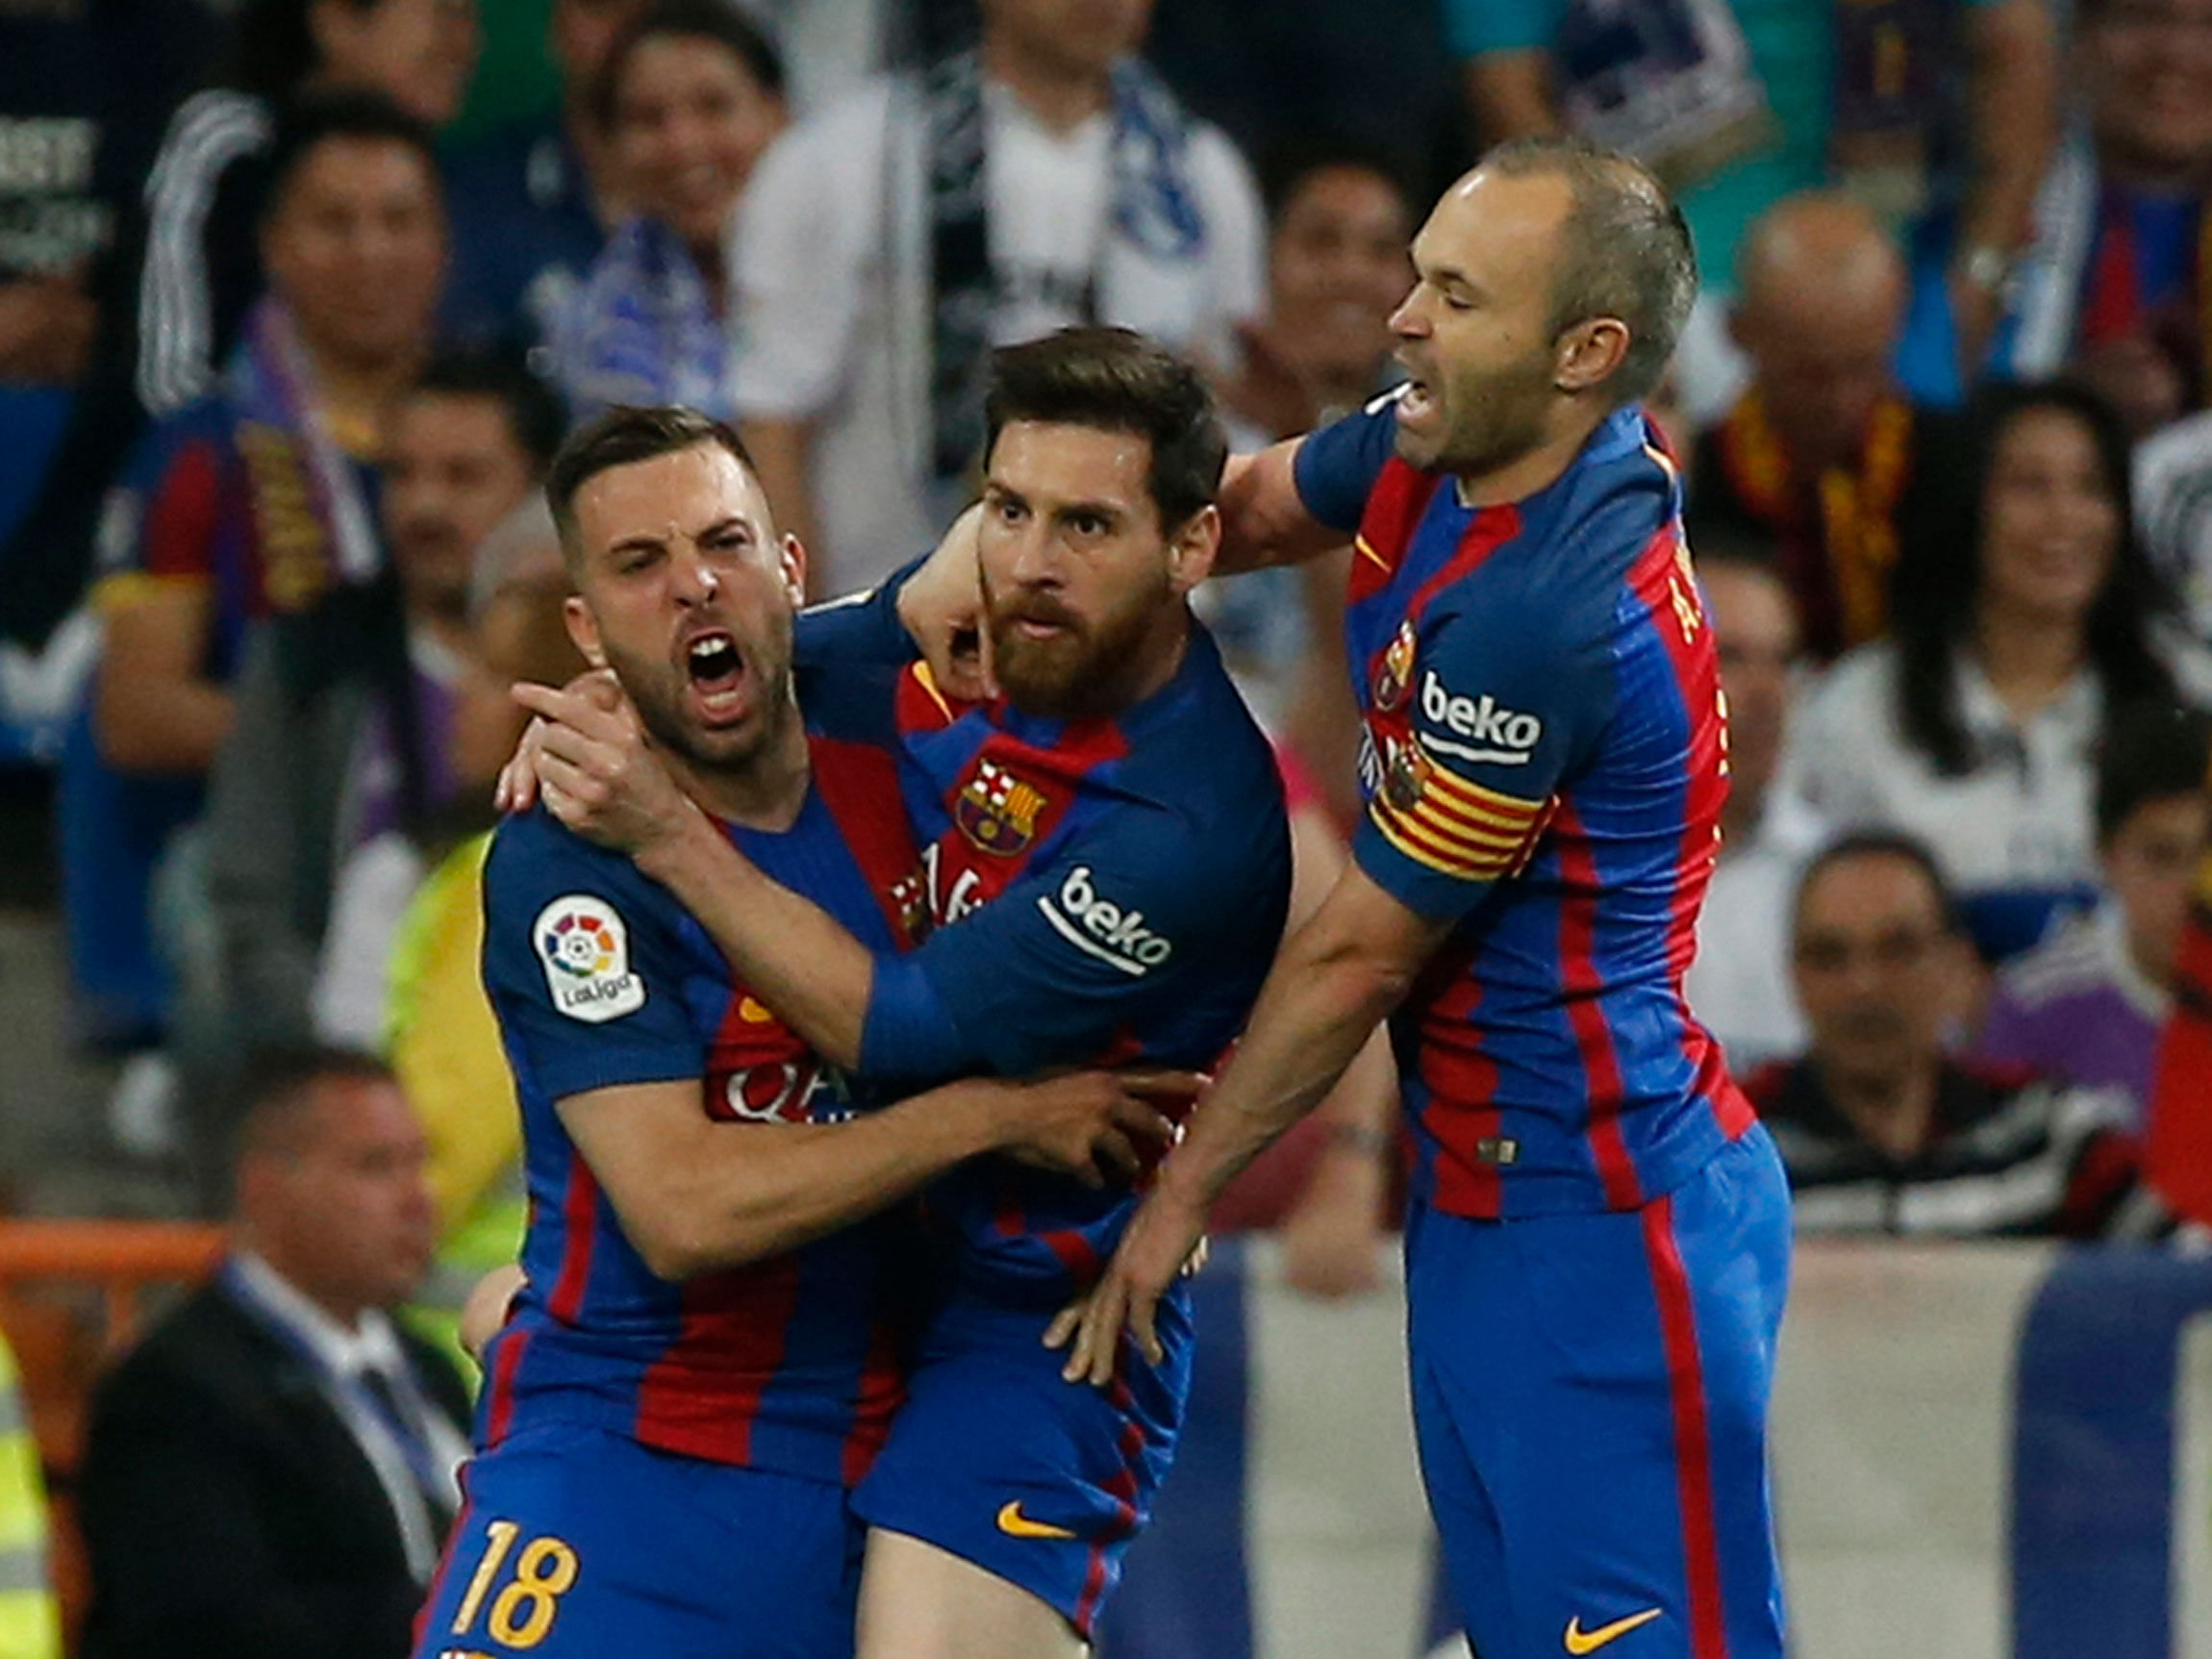 Barcelona's Lionel Messi celebrates scoring their first goal with team mates. Reuters